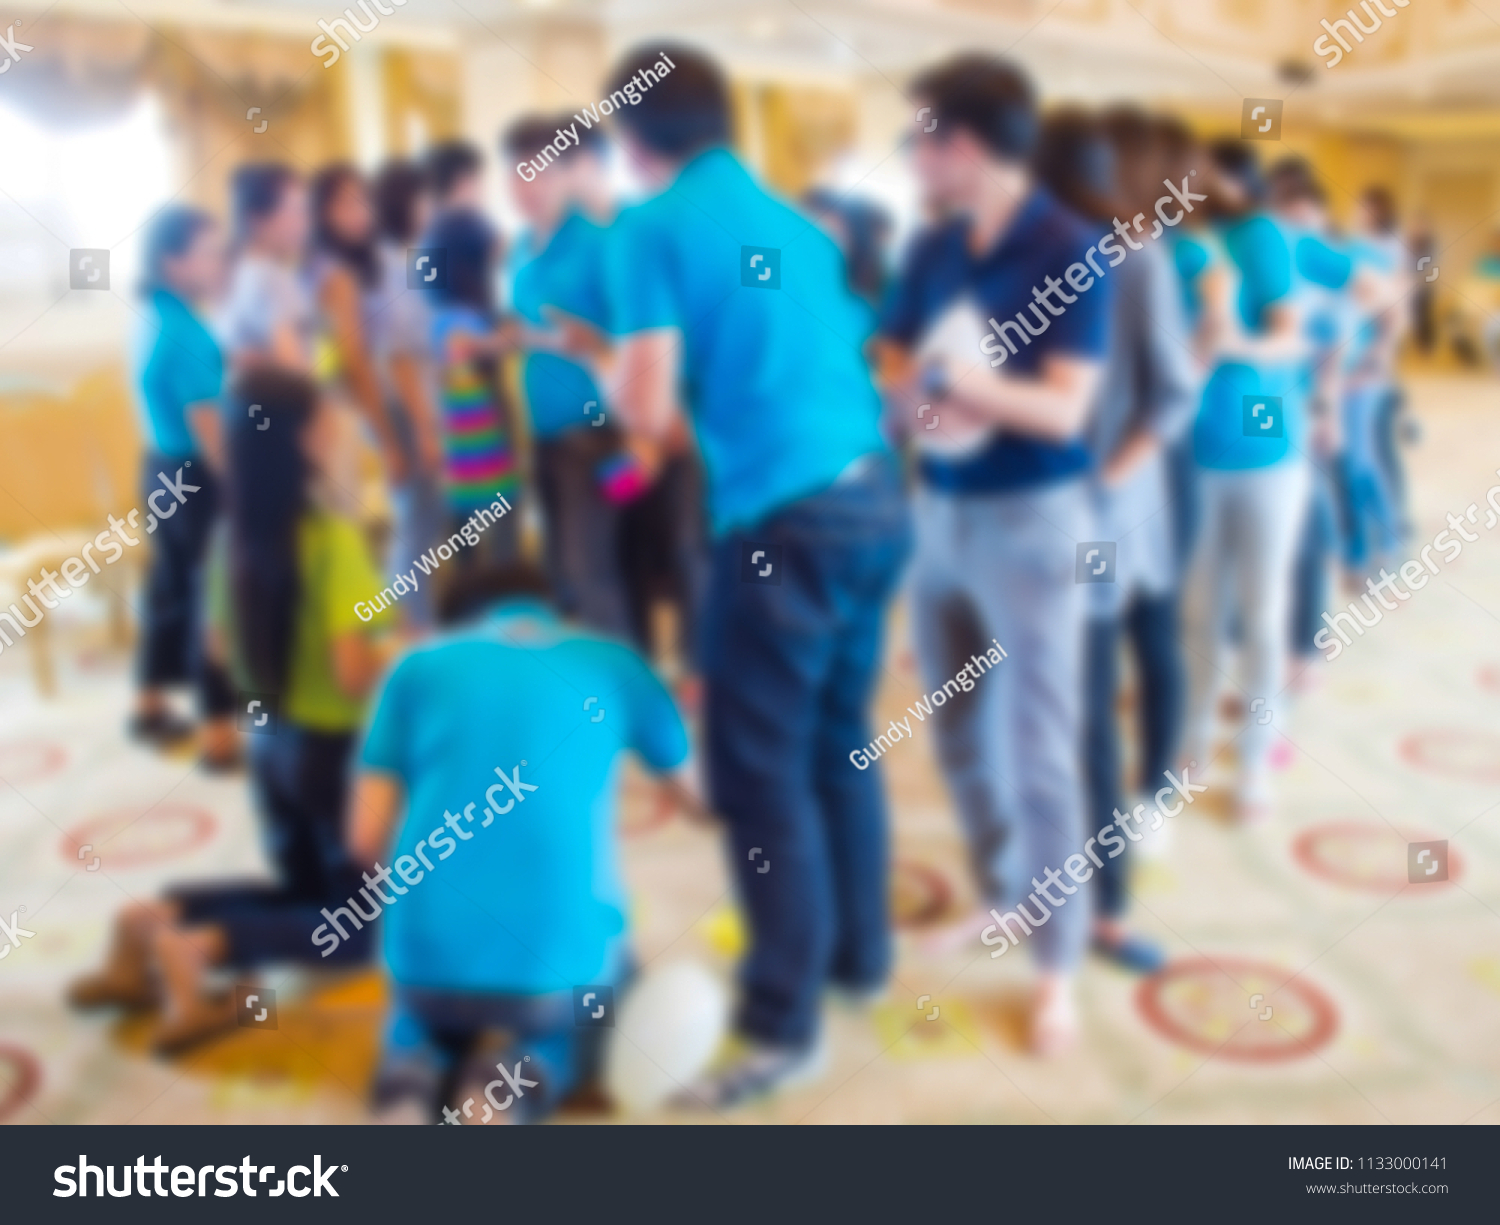 Meetings and activities, walk rally, recreation activities, walk rally activities to create relationships. To the staff in the agency.Optimize performance. Abstract image blur. #1133000141